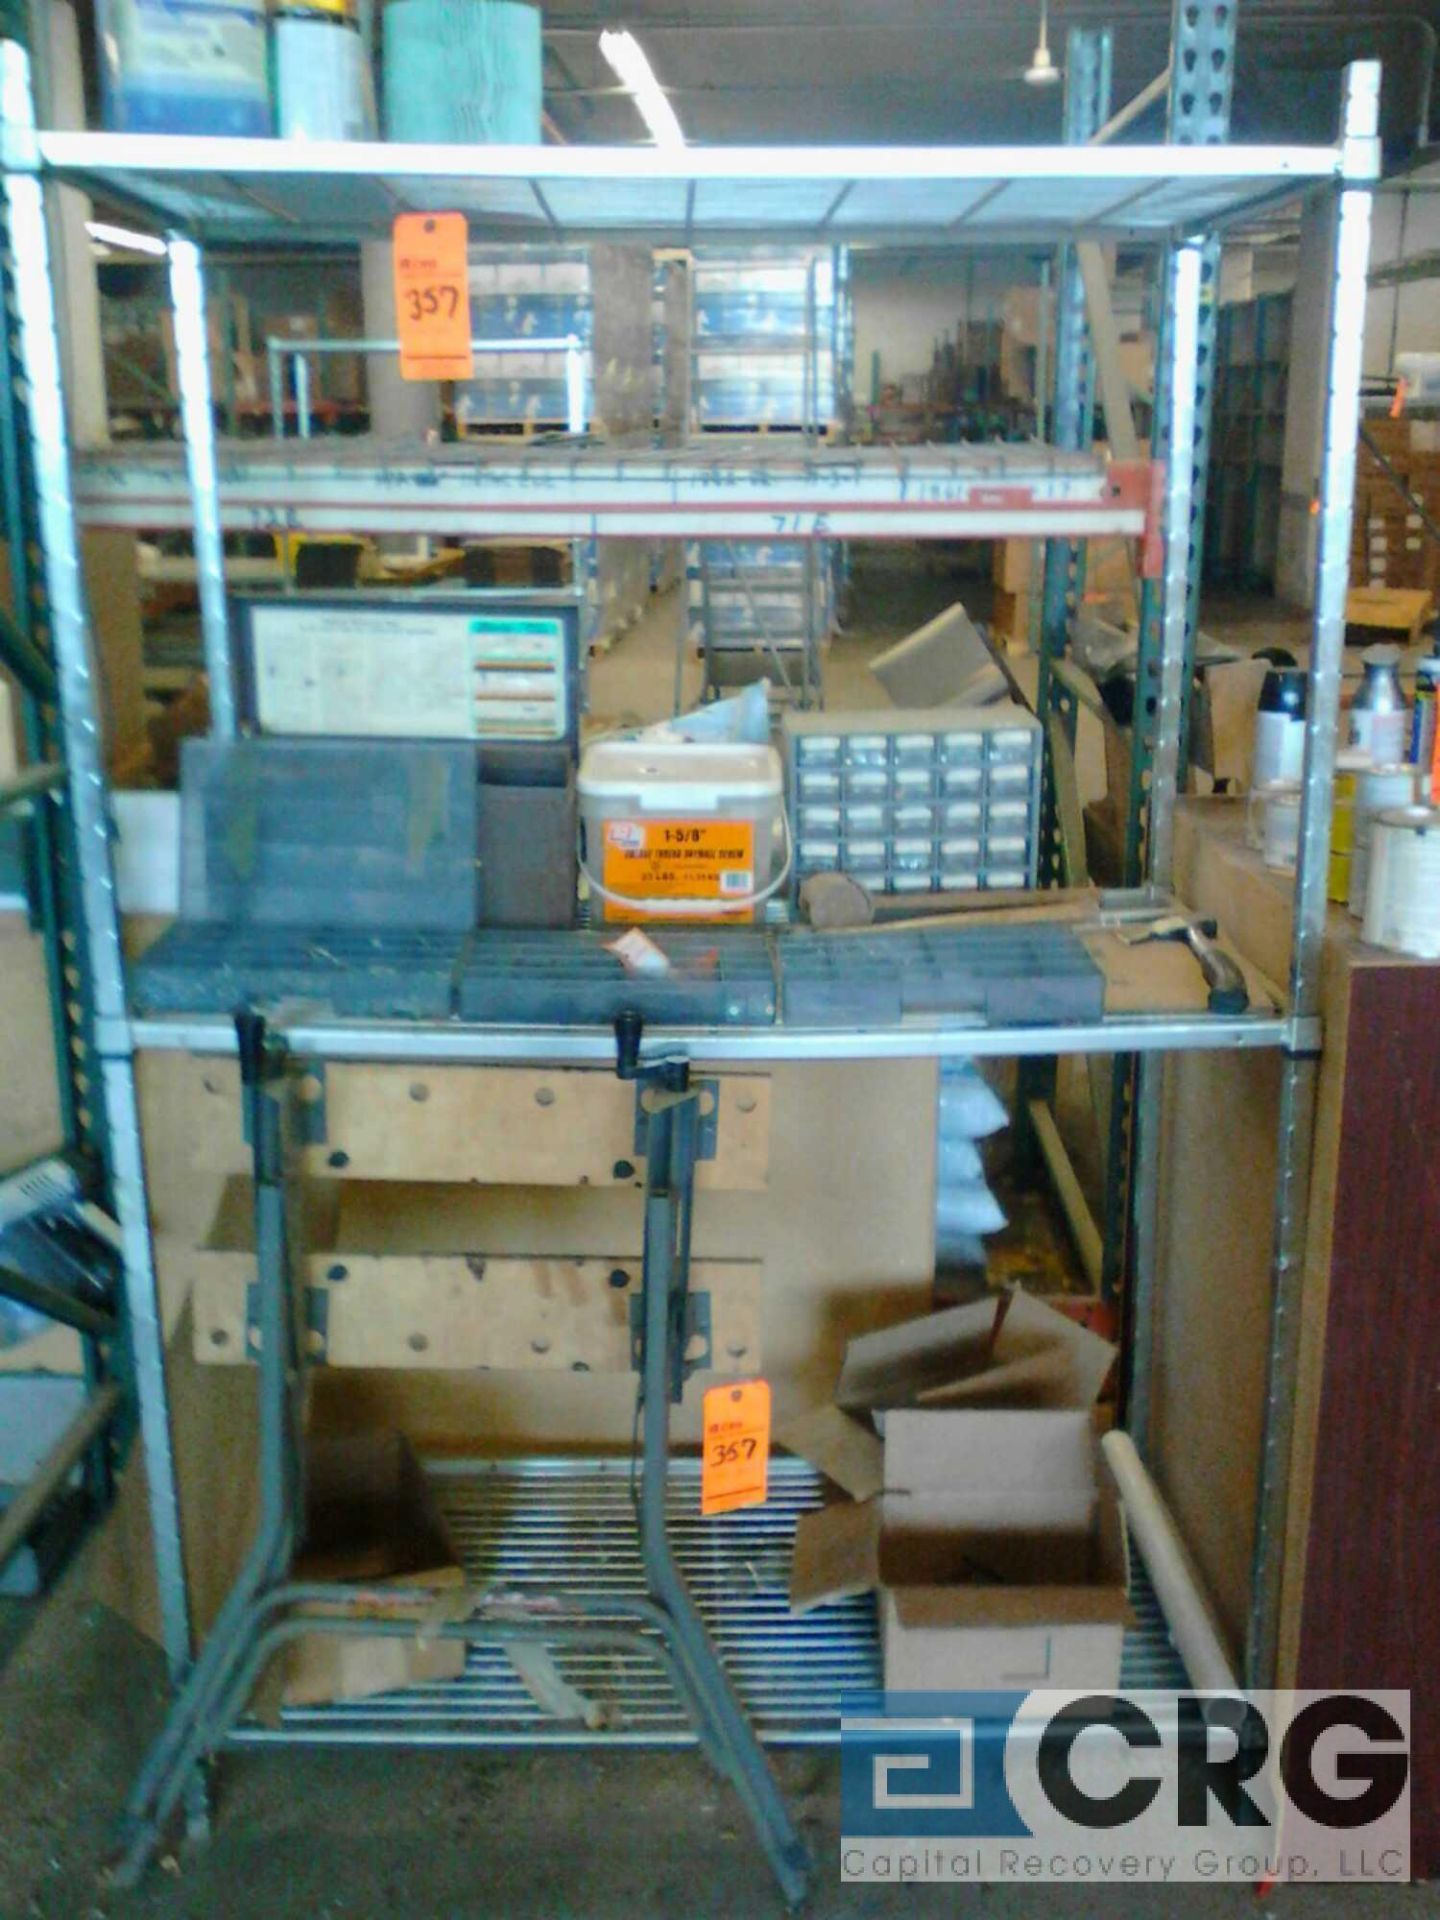 Lot of asst tools, includes - clamps, sockets, workbenches, etc - Image 4 of 4